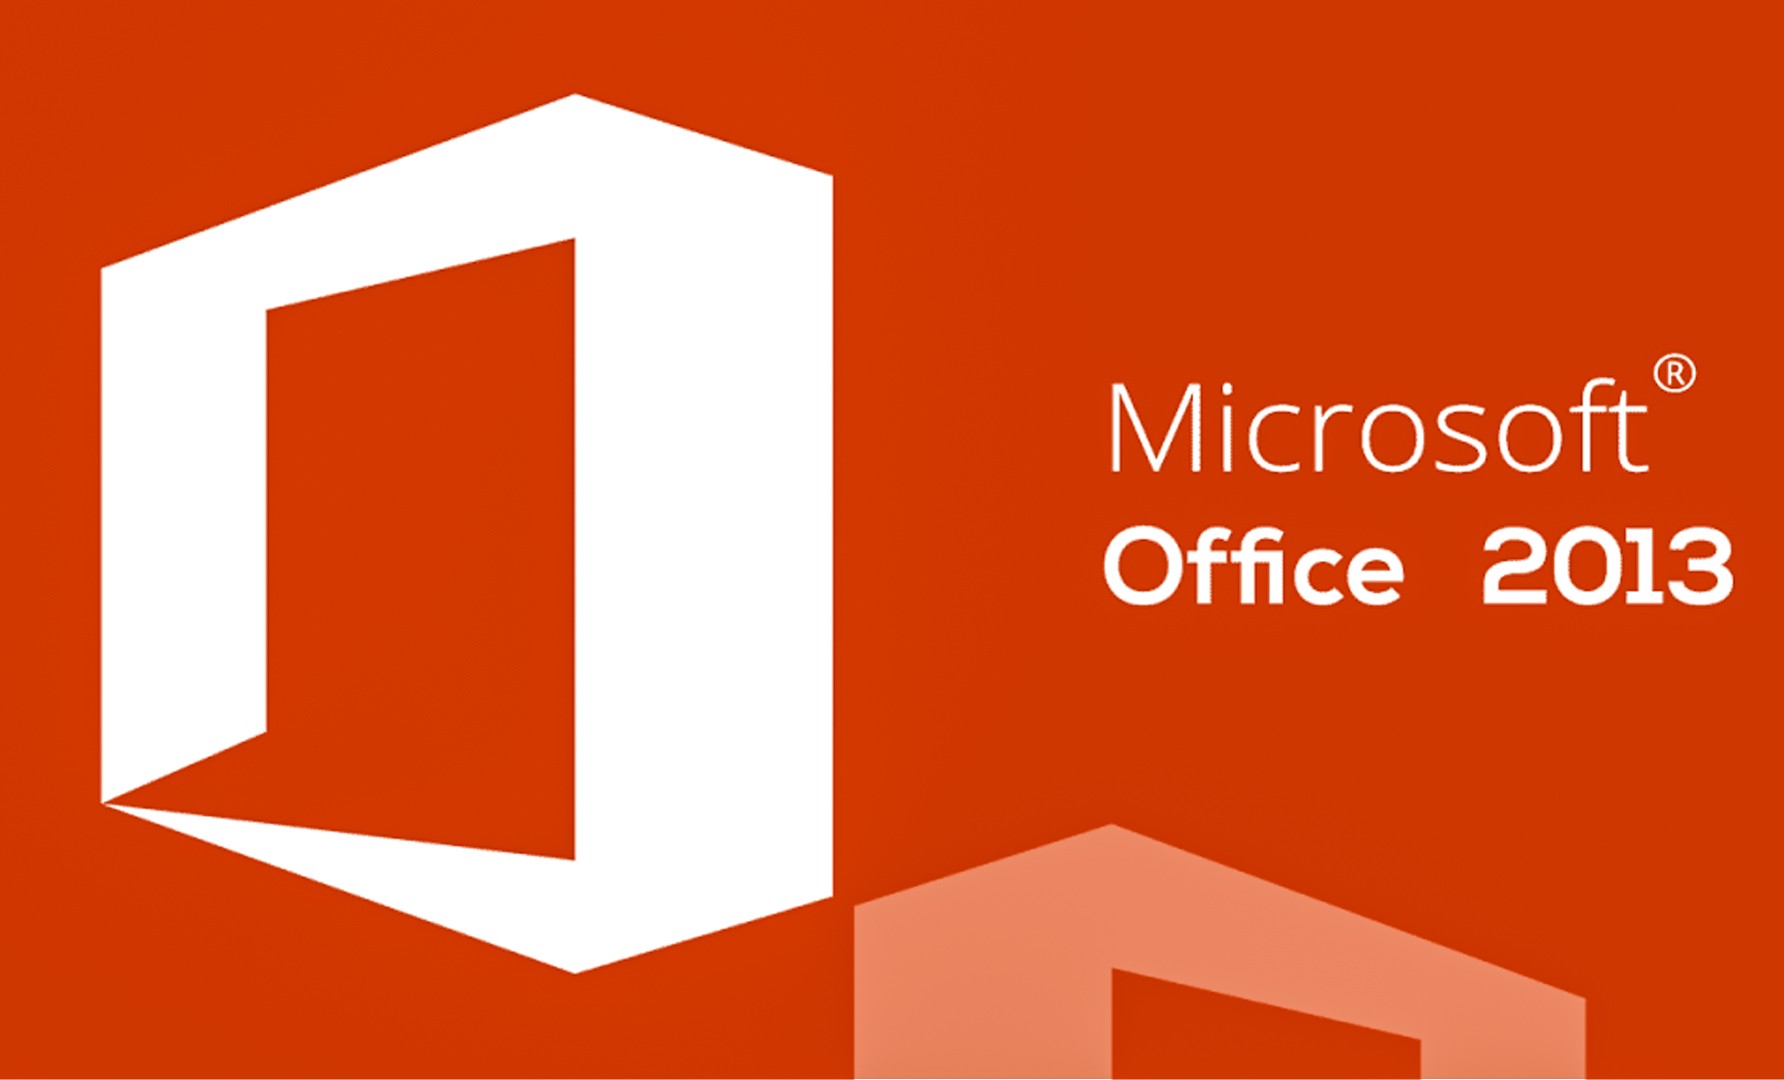 Microsoft Office 2013 support will be discontinued in April next year 